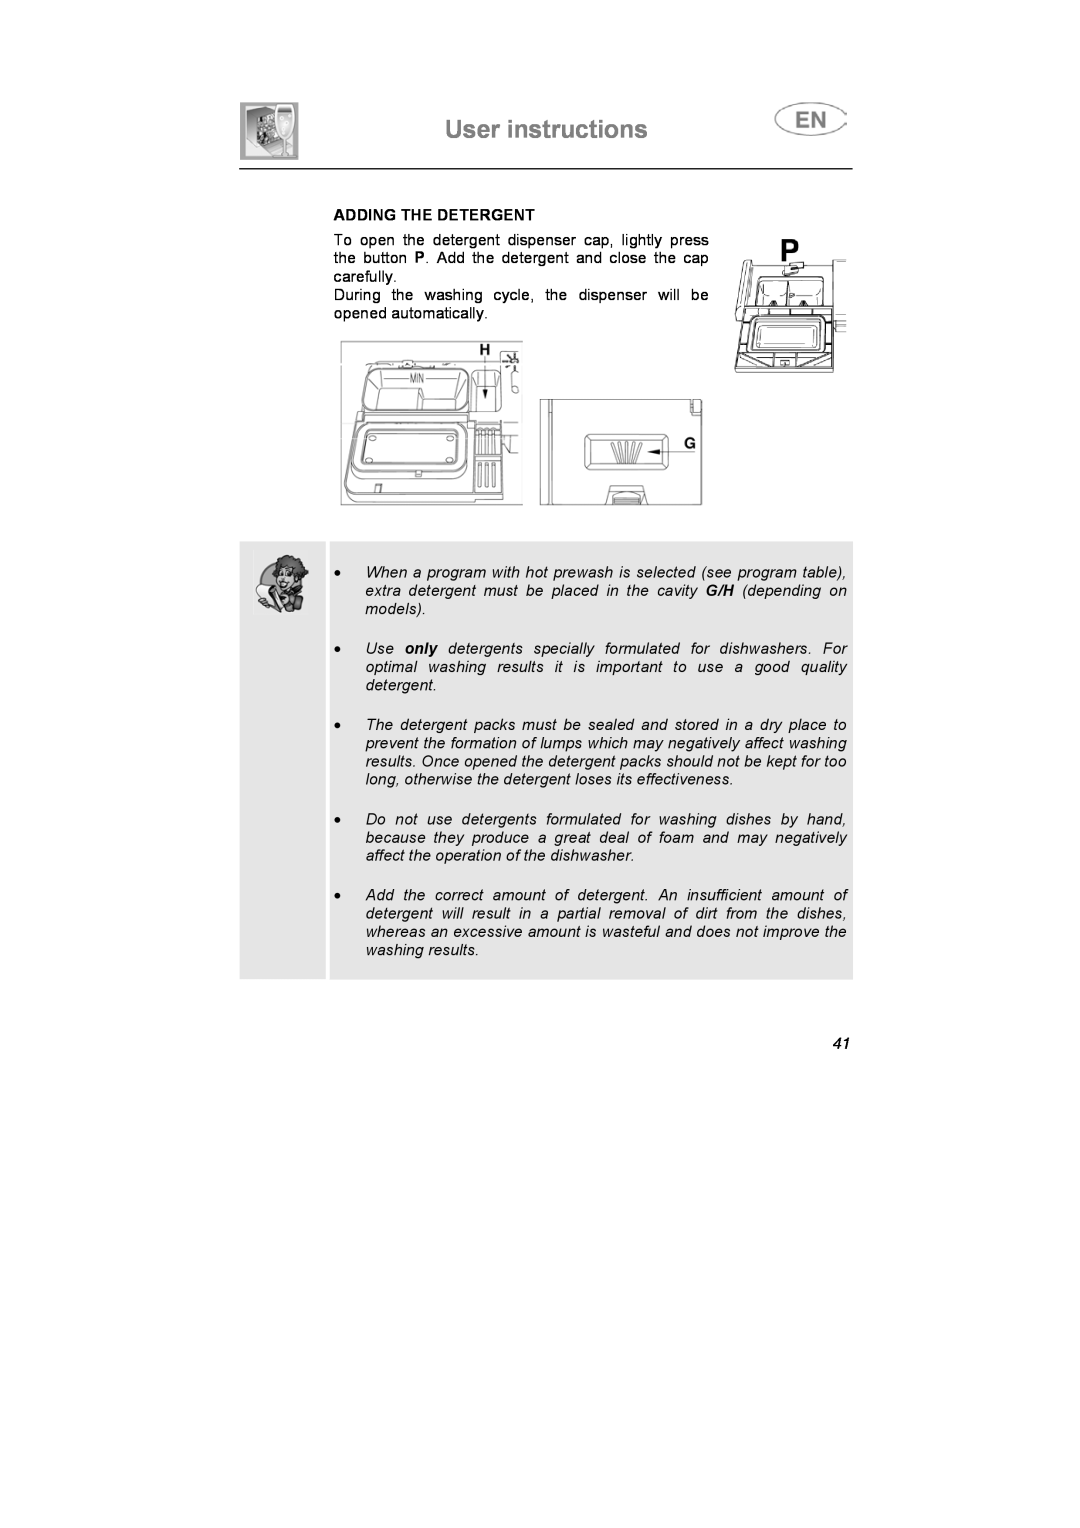 Smeg DF612S7 User instructions, Adding The Detergent, During the washing cycle, the dispenser will be opened automatically 